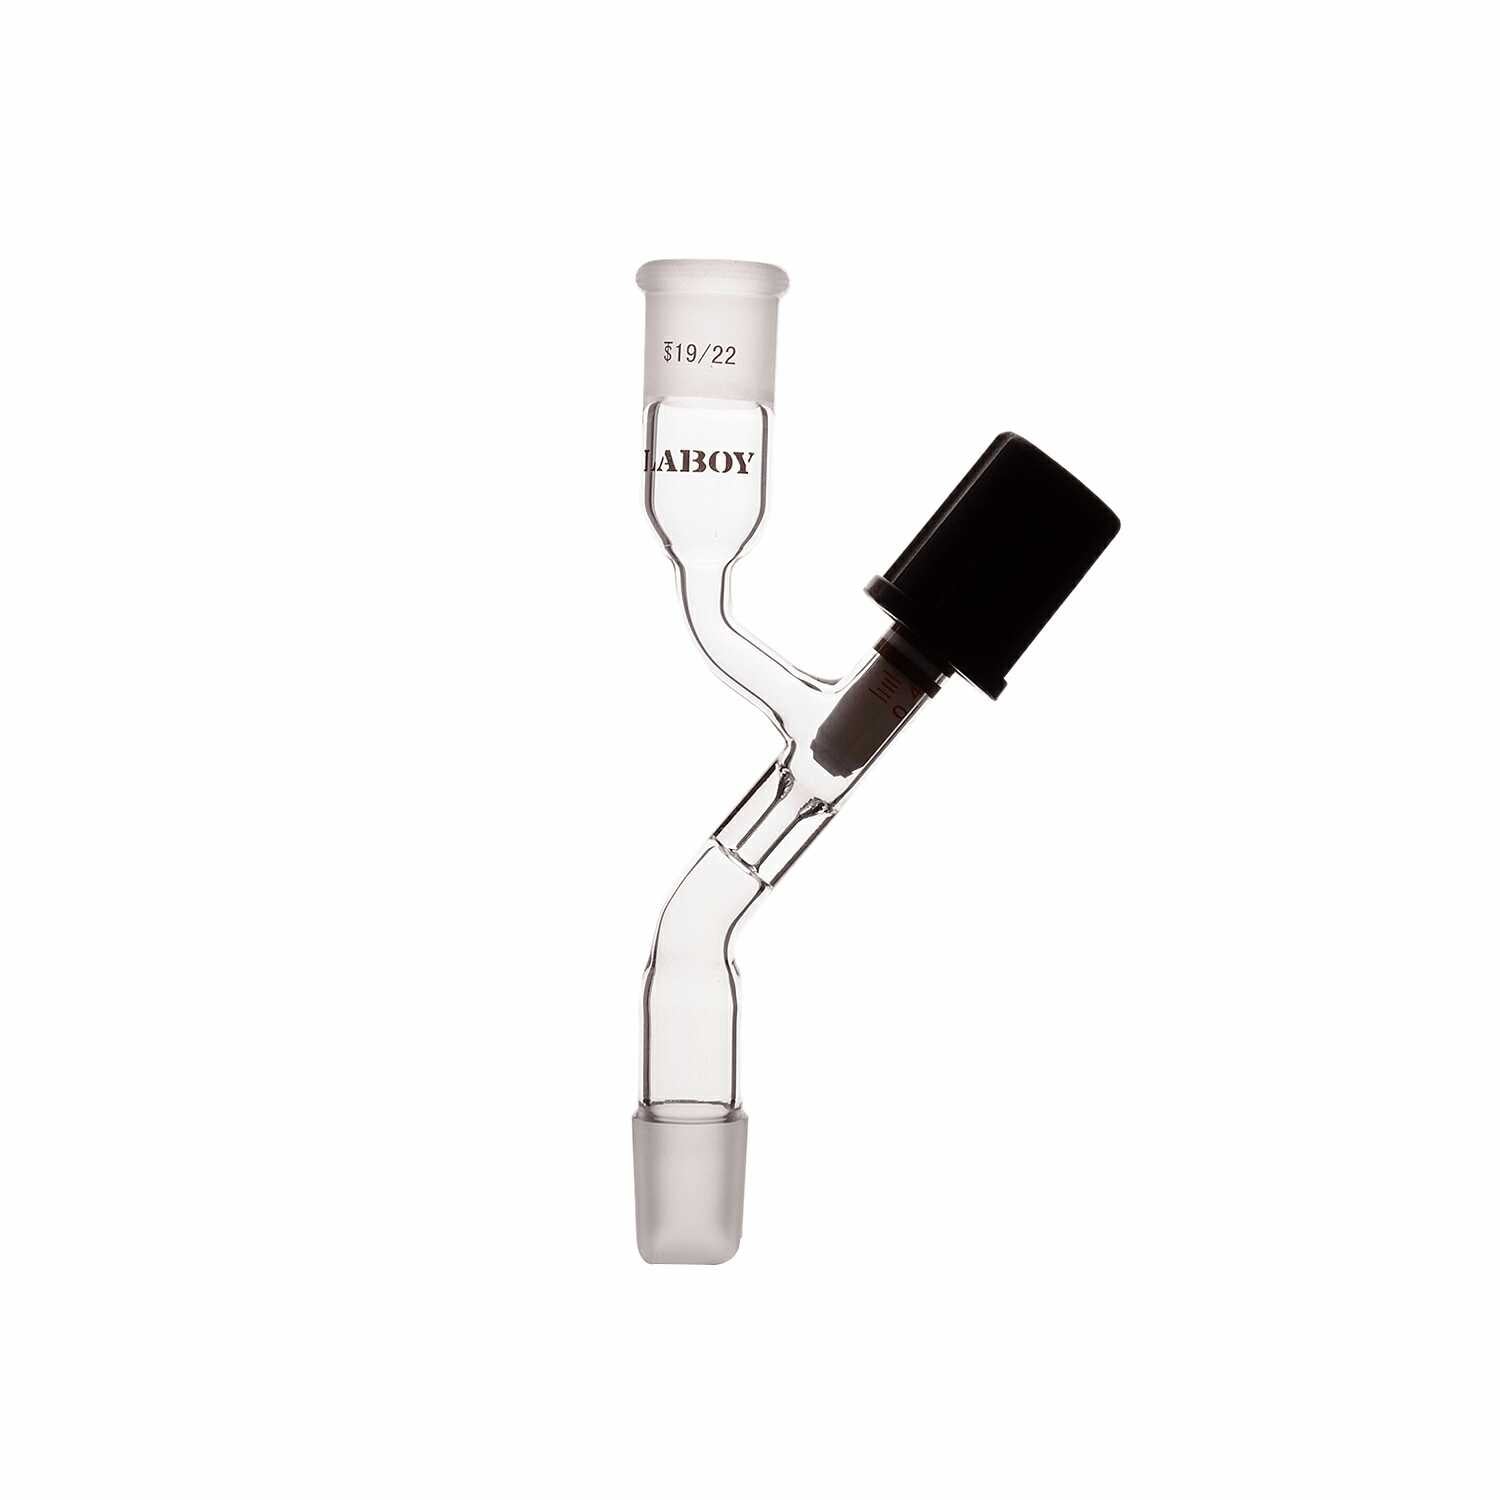 Glass Transfer Adapter With Taper Joints & High Vacuum Valve - Scienmart